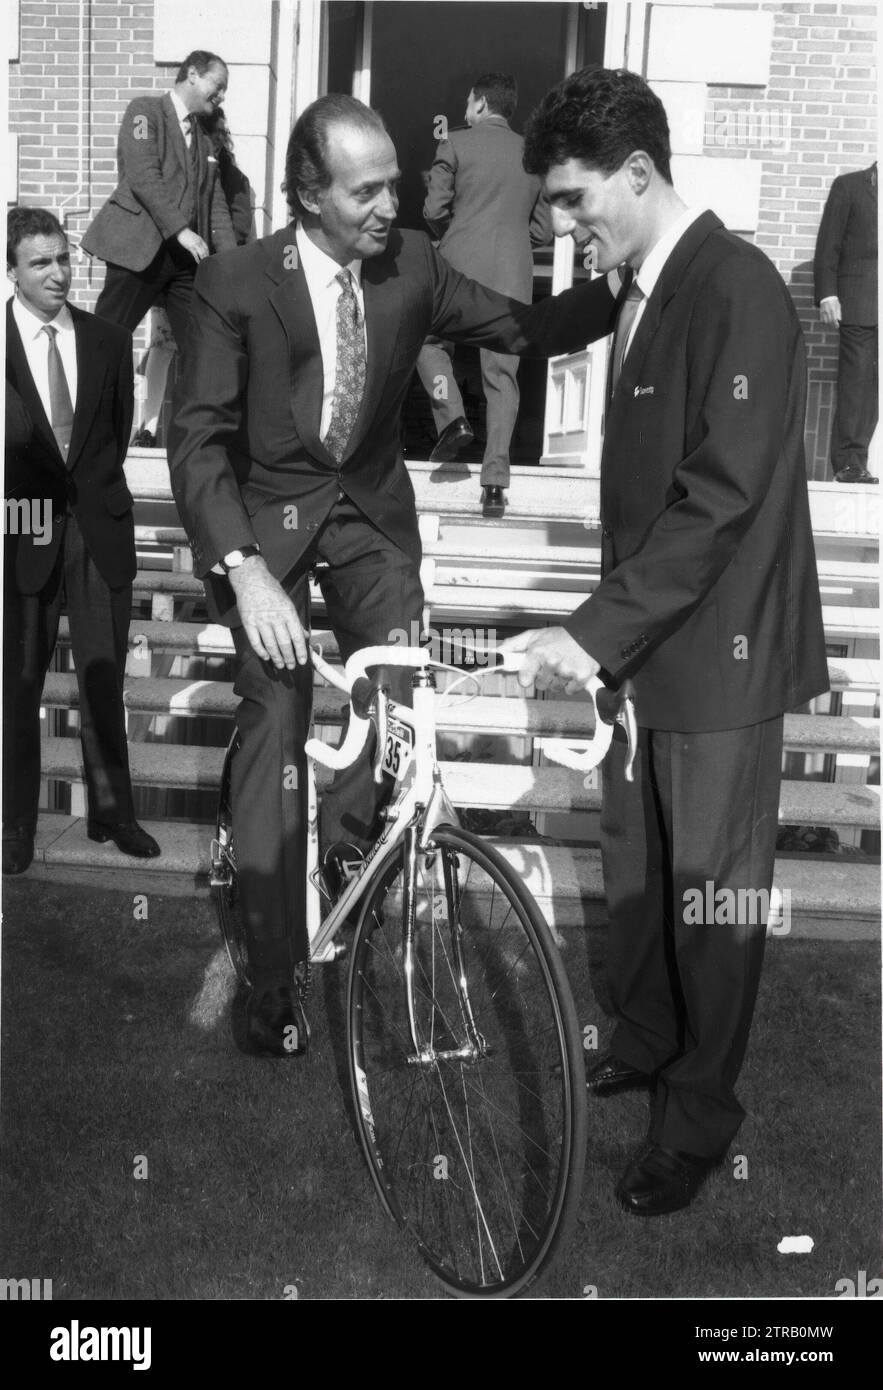 12/16/1991. December 17: during an audience at the Zarzuela, Miguel Induráin gives the King the bicycle with which he won the Tour de France. Credit: Album / Archivo ABC / Jaime Pato Stock Photo